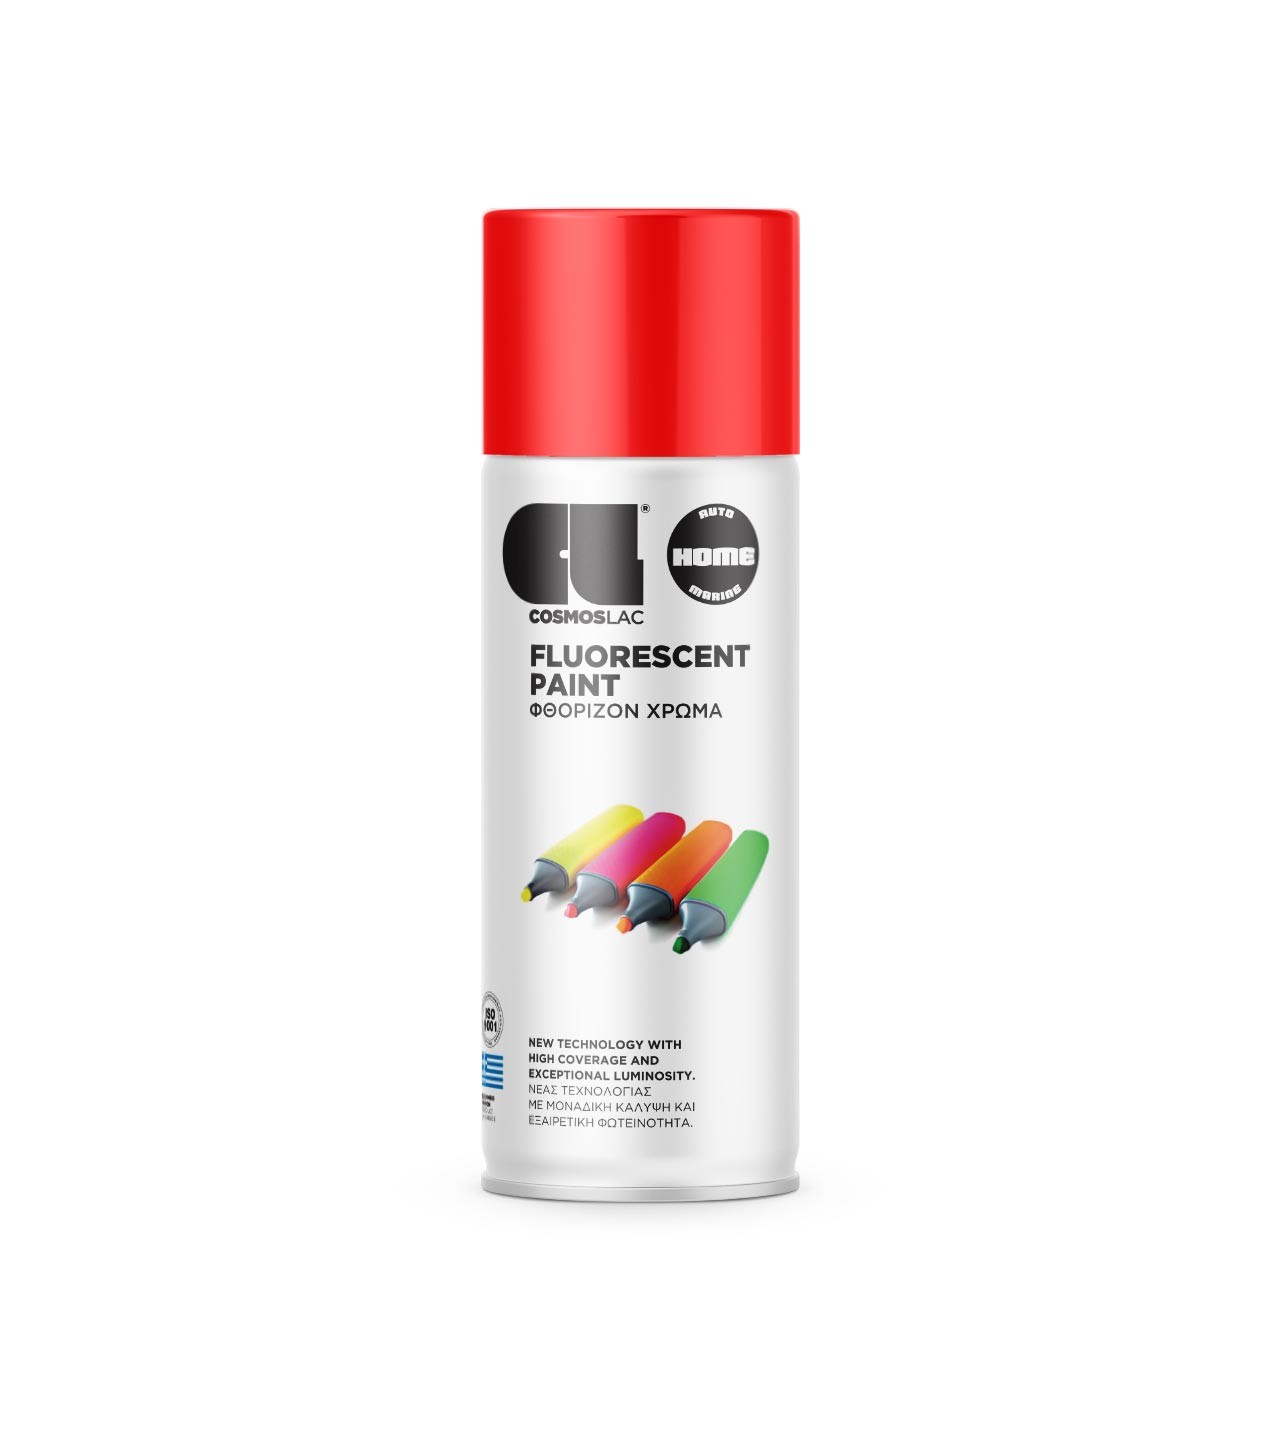 Cosmos Lac Fluorescent Spray Paint Red